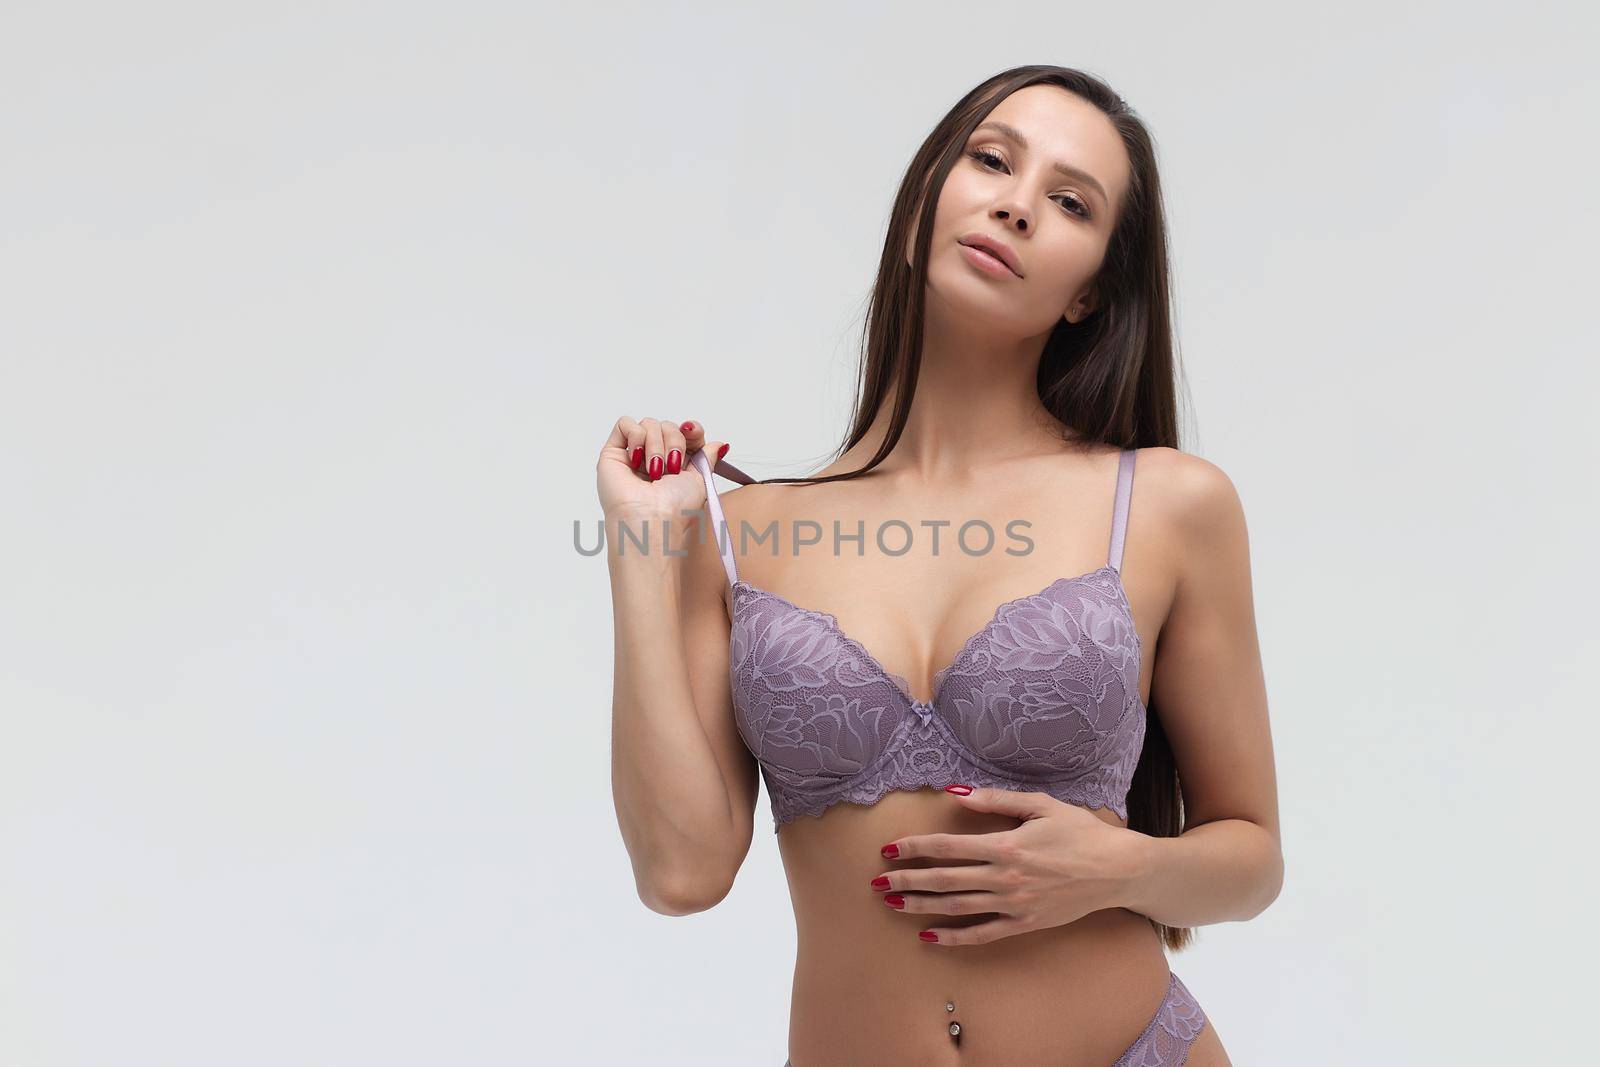 Coquette female model in lace purple bra and panties standing on white background in studio and touching hair while looking at camera